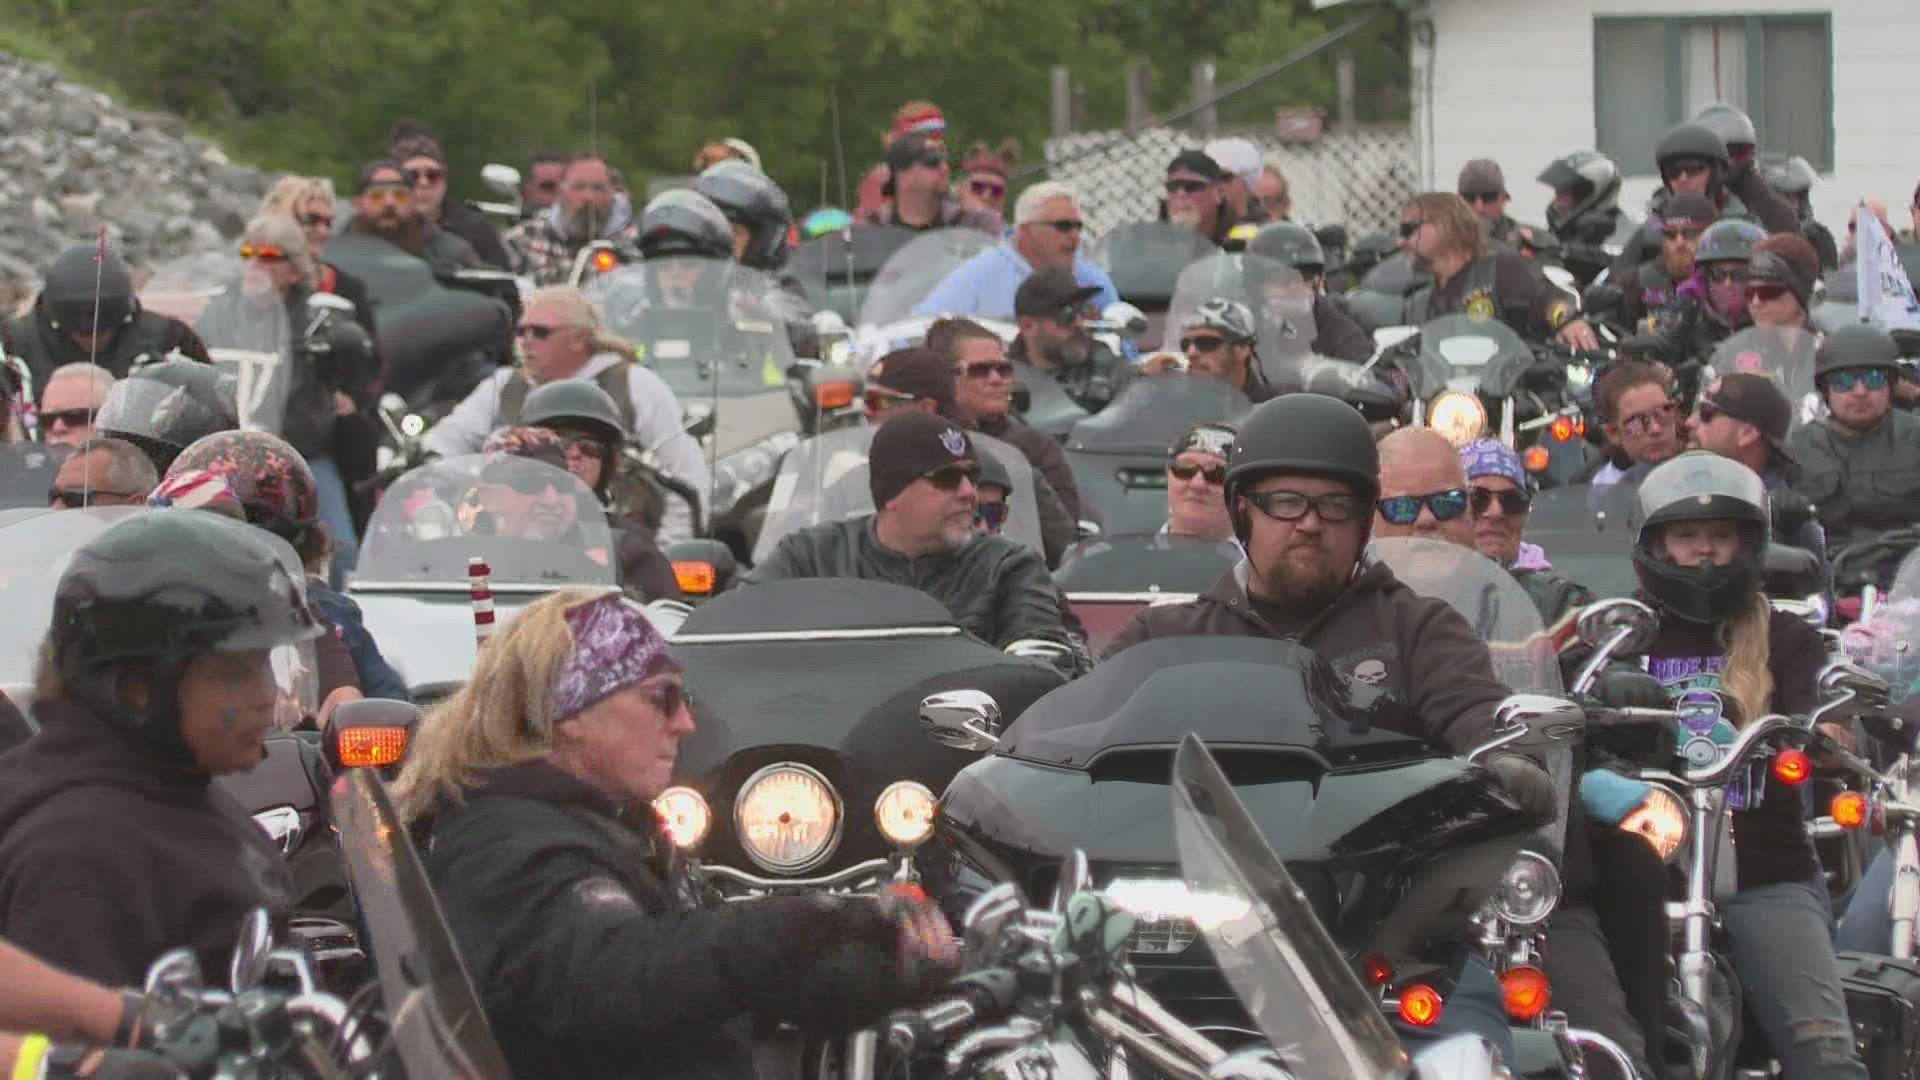 Sunday marked the 5th annual Pain to Power Suicide Awareness Ride in Lewiston